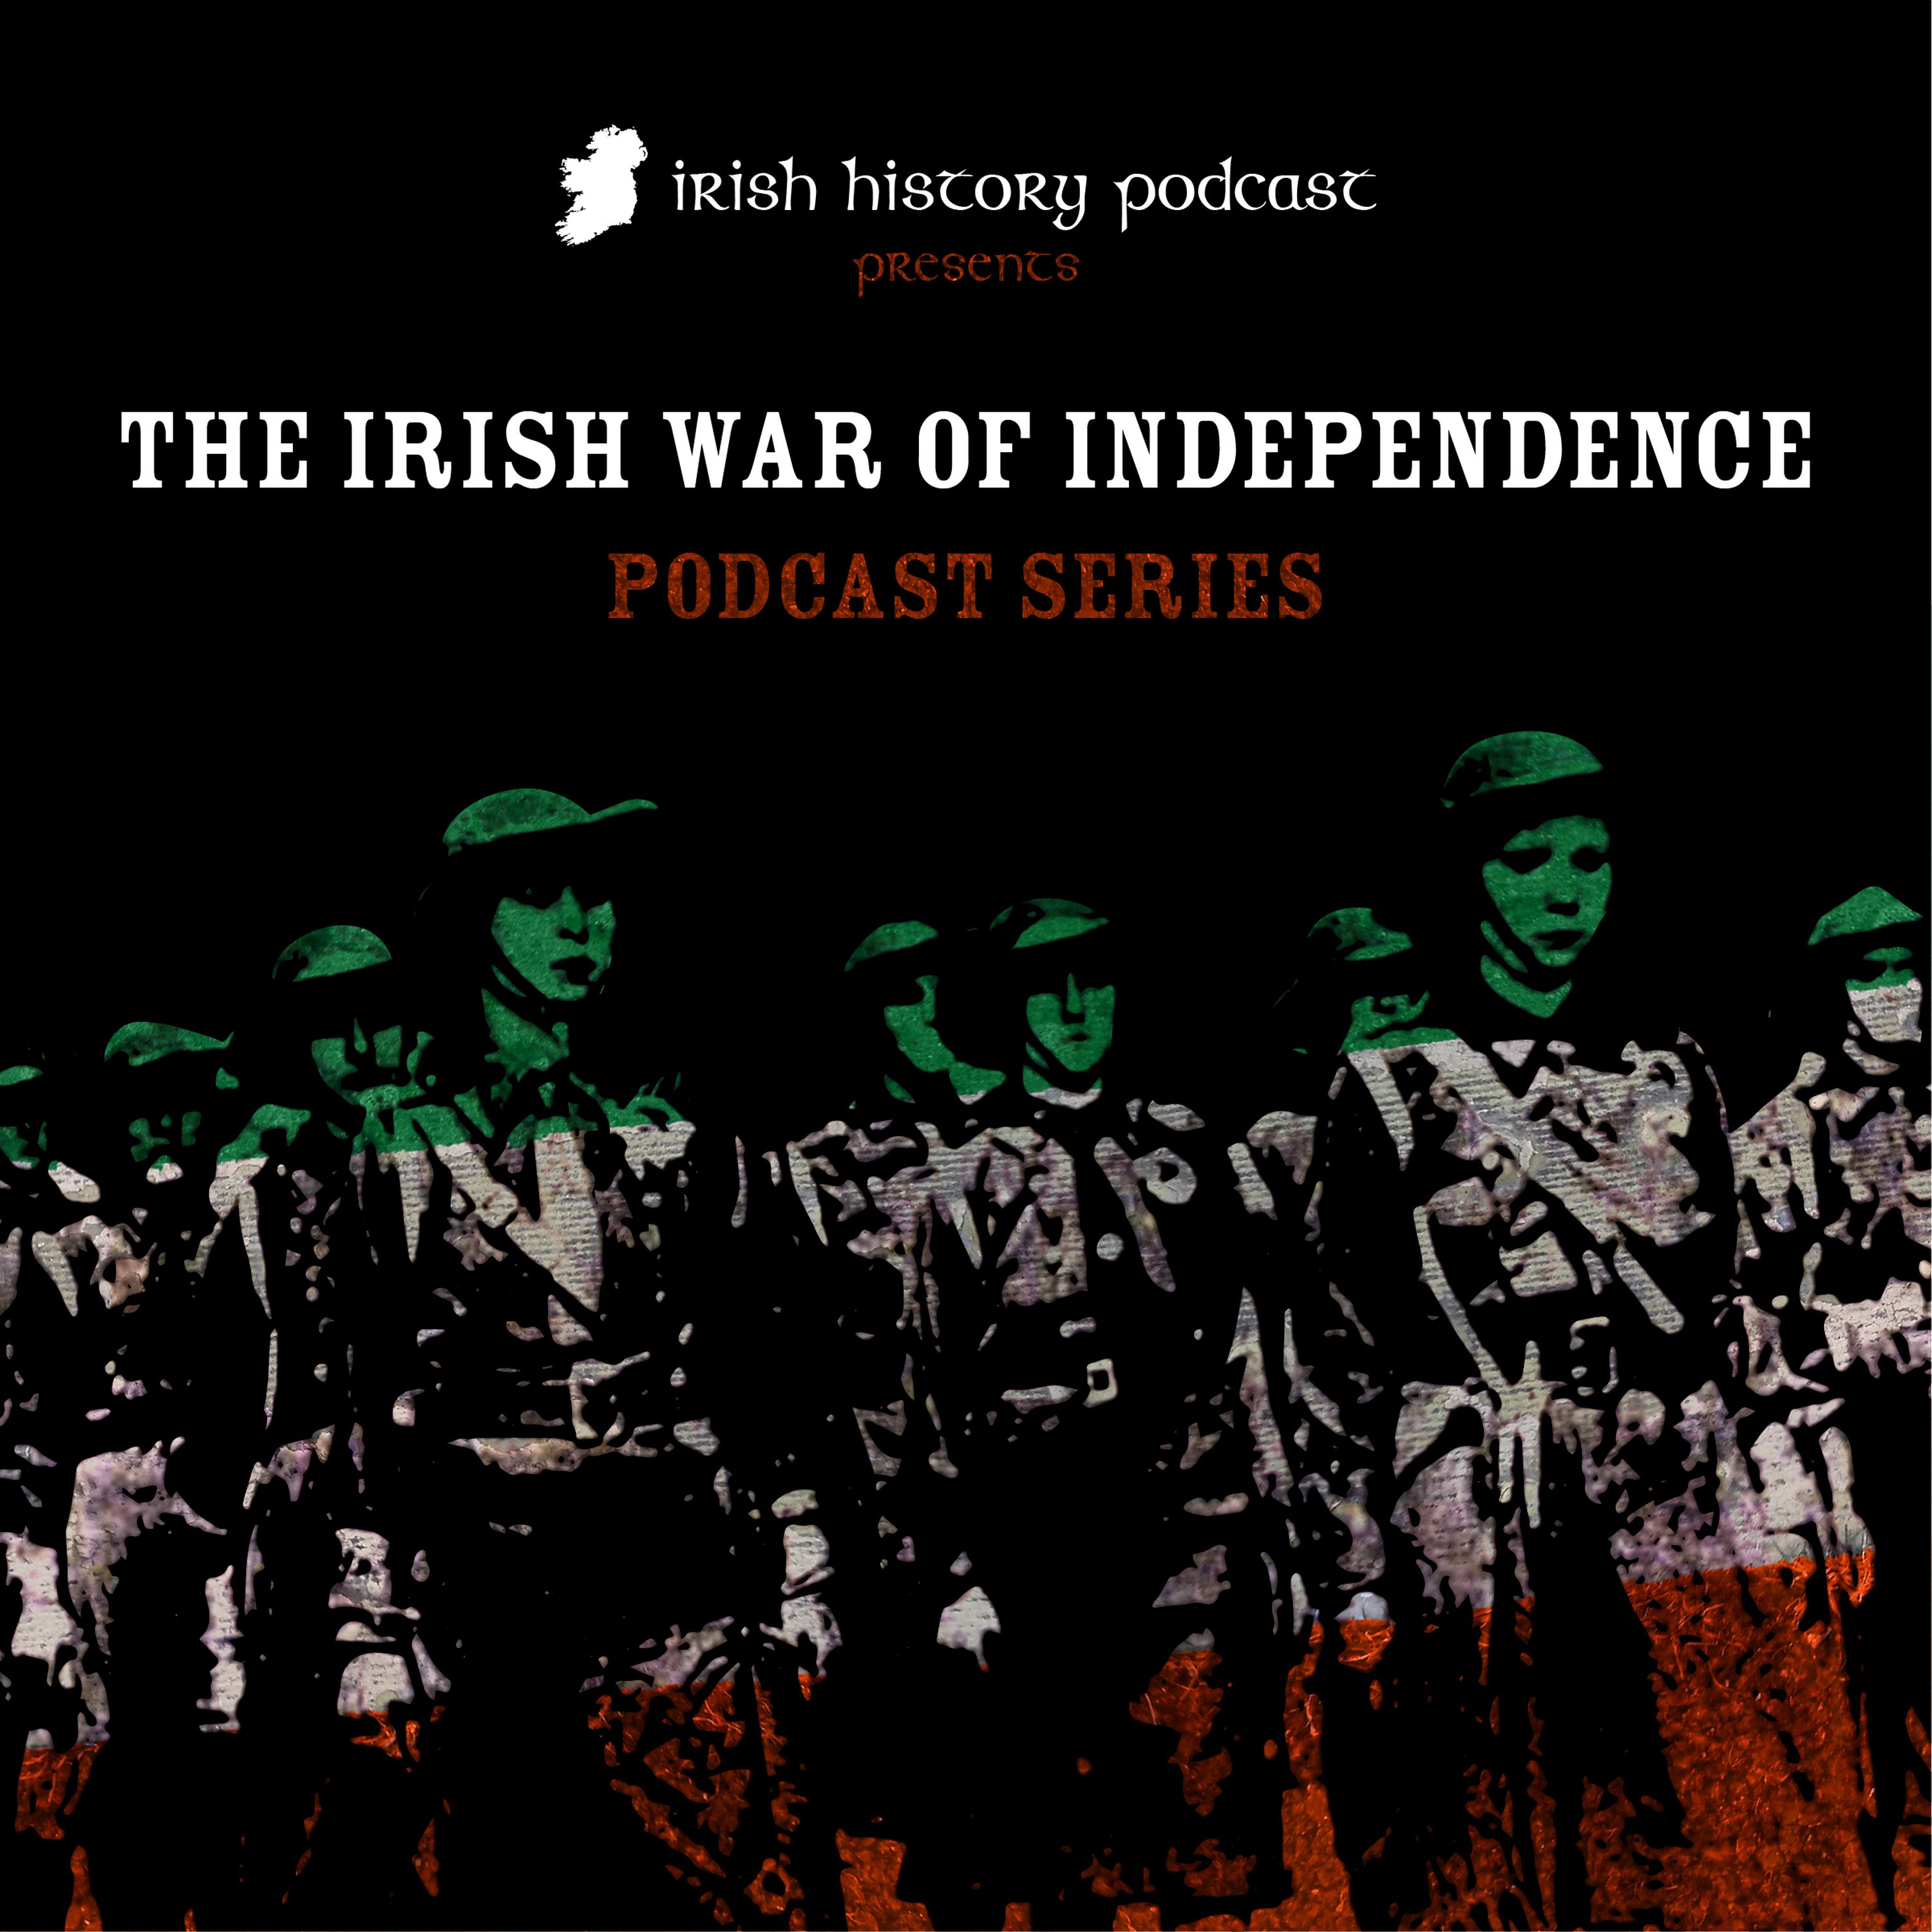 The War of Independence (Part XV) - Daily Life during the War